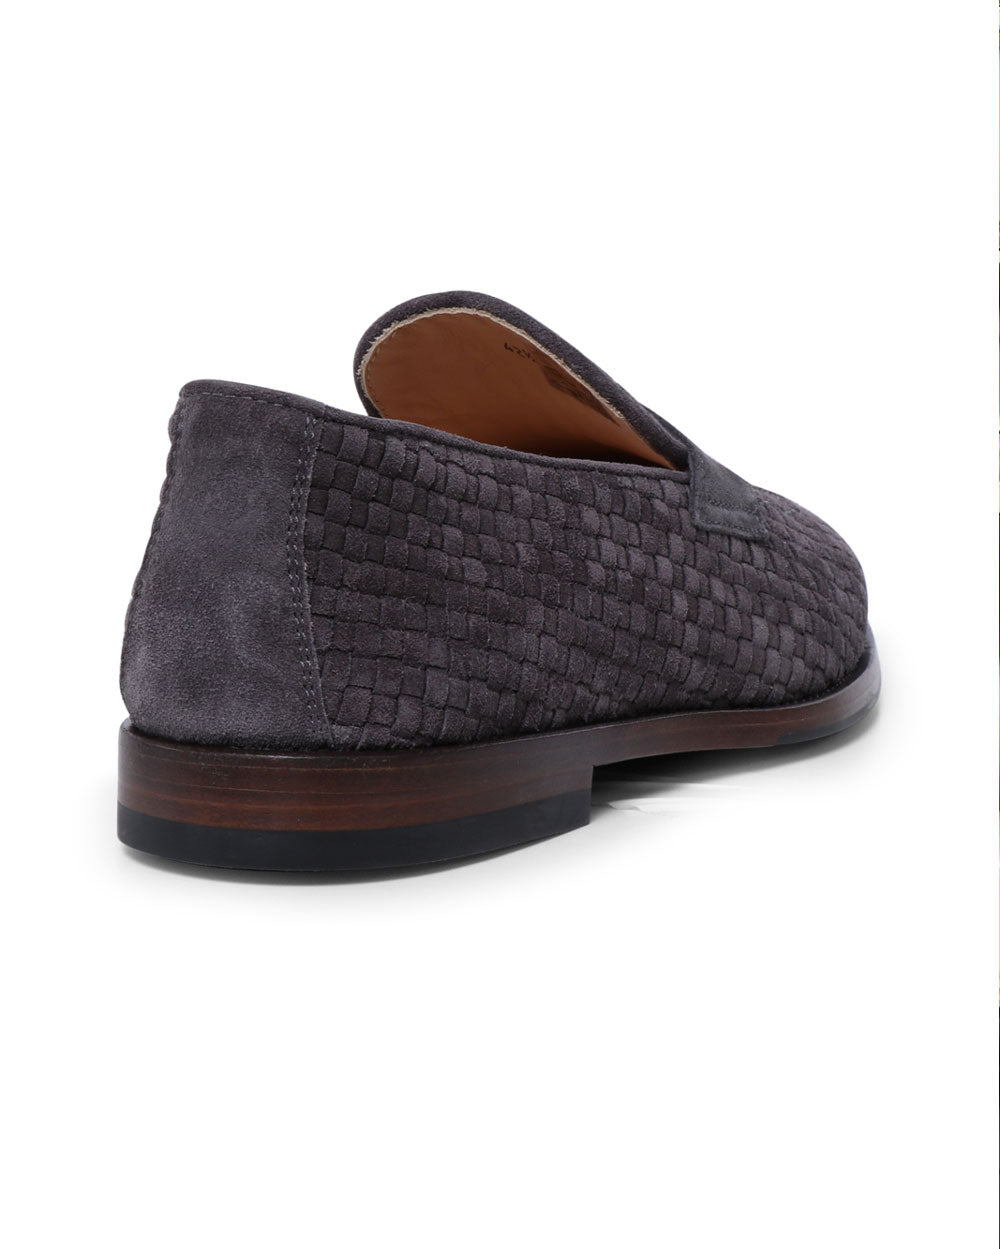 Woven Suede Penny Loafer in Seal Grey